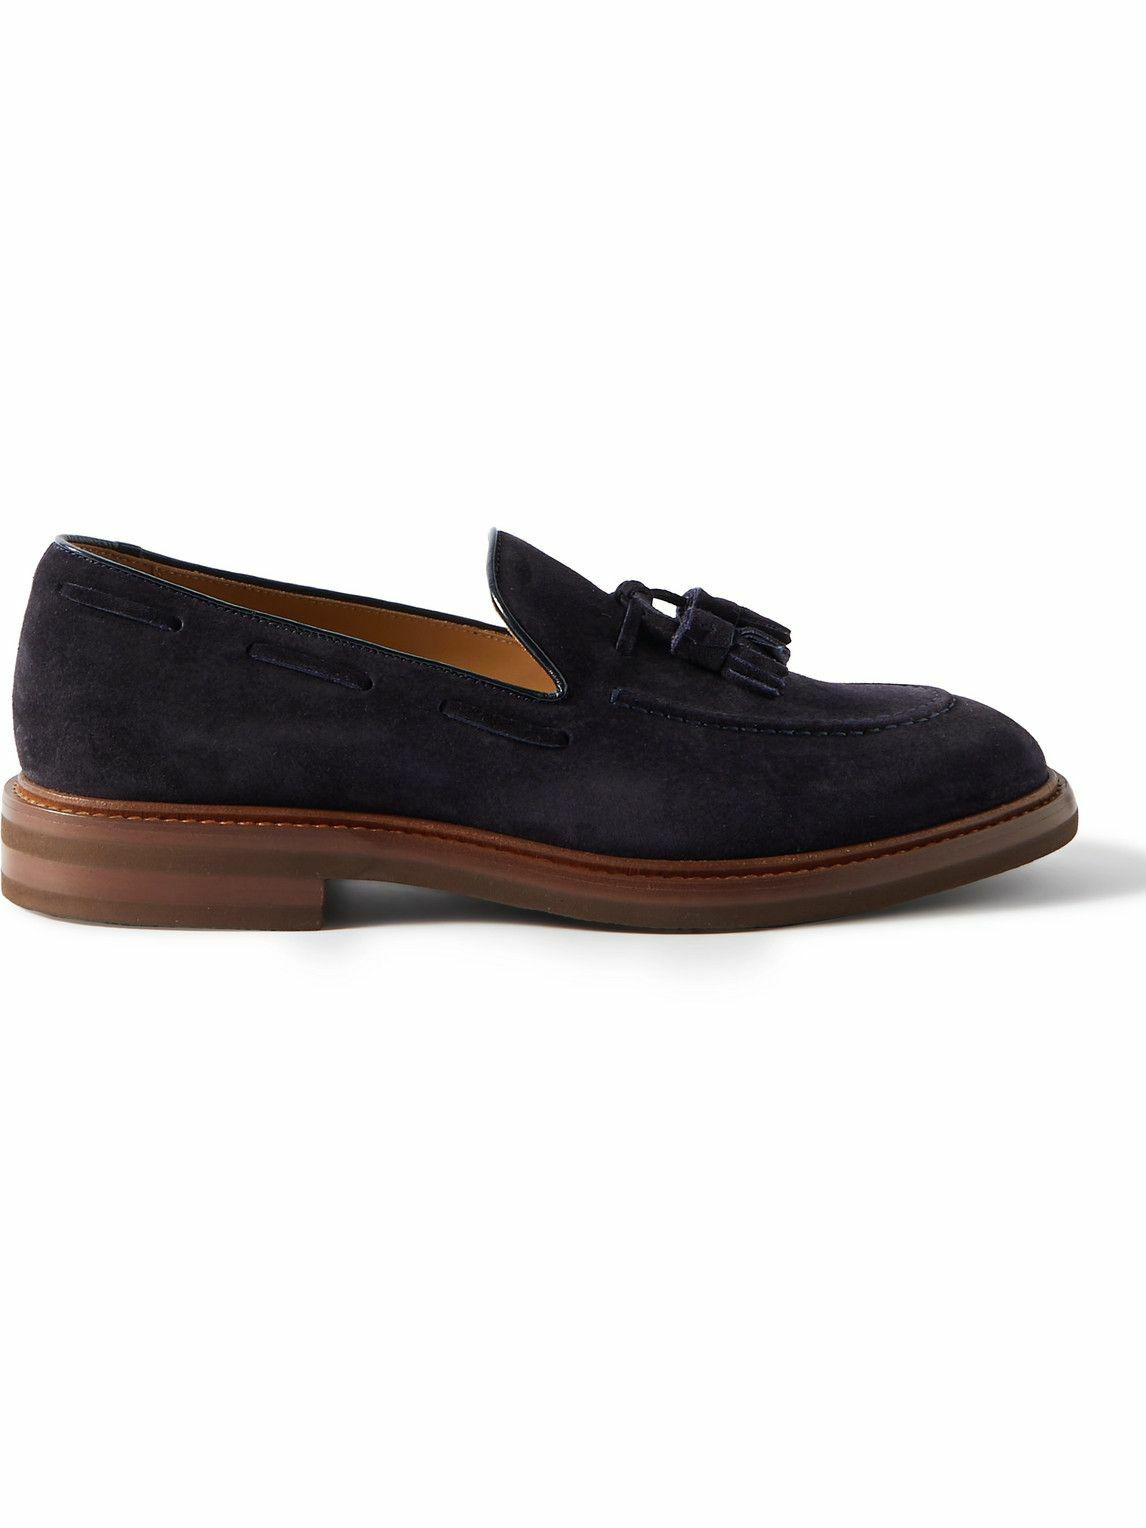 Brunello Cucinelli - Leather-Trimmed Tasselled Suede Loafers - Blue ...